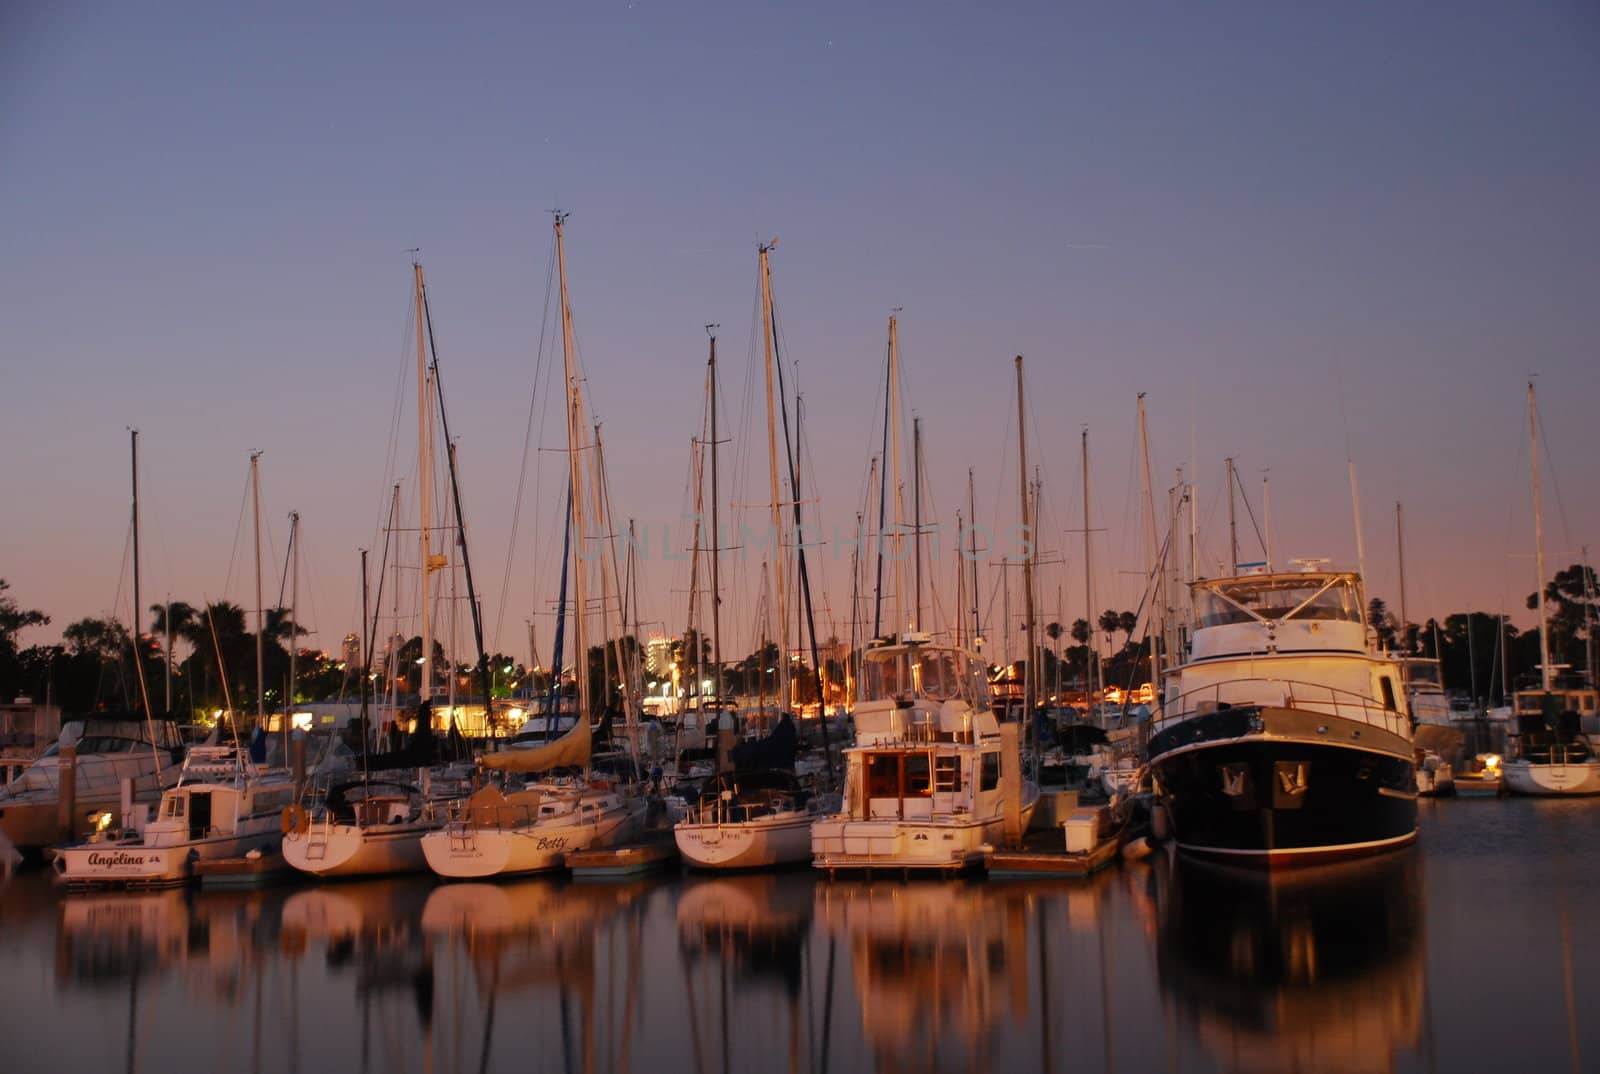 Boats in a harbor at dusk